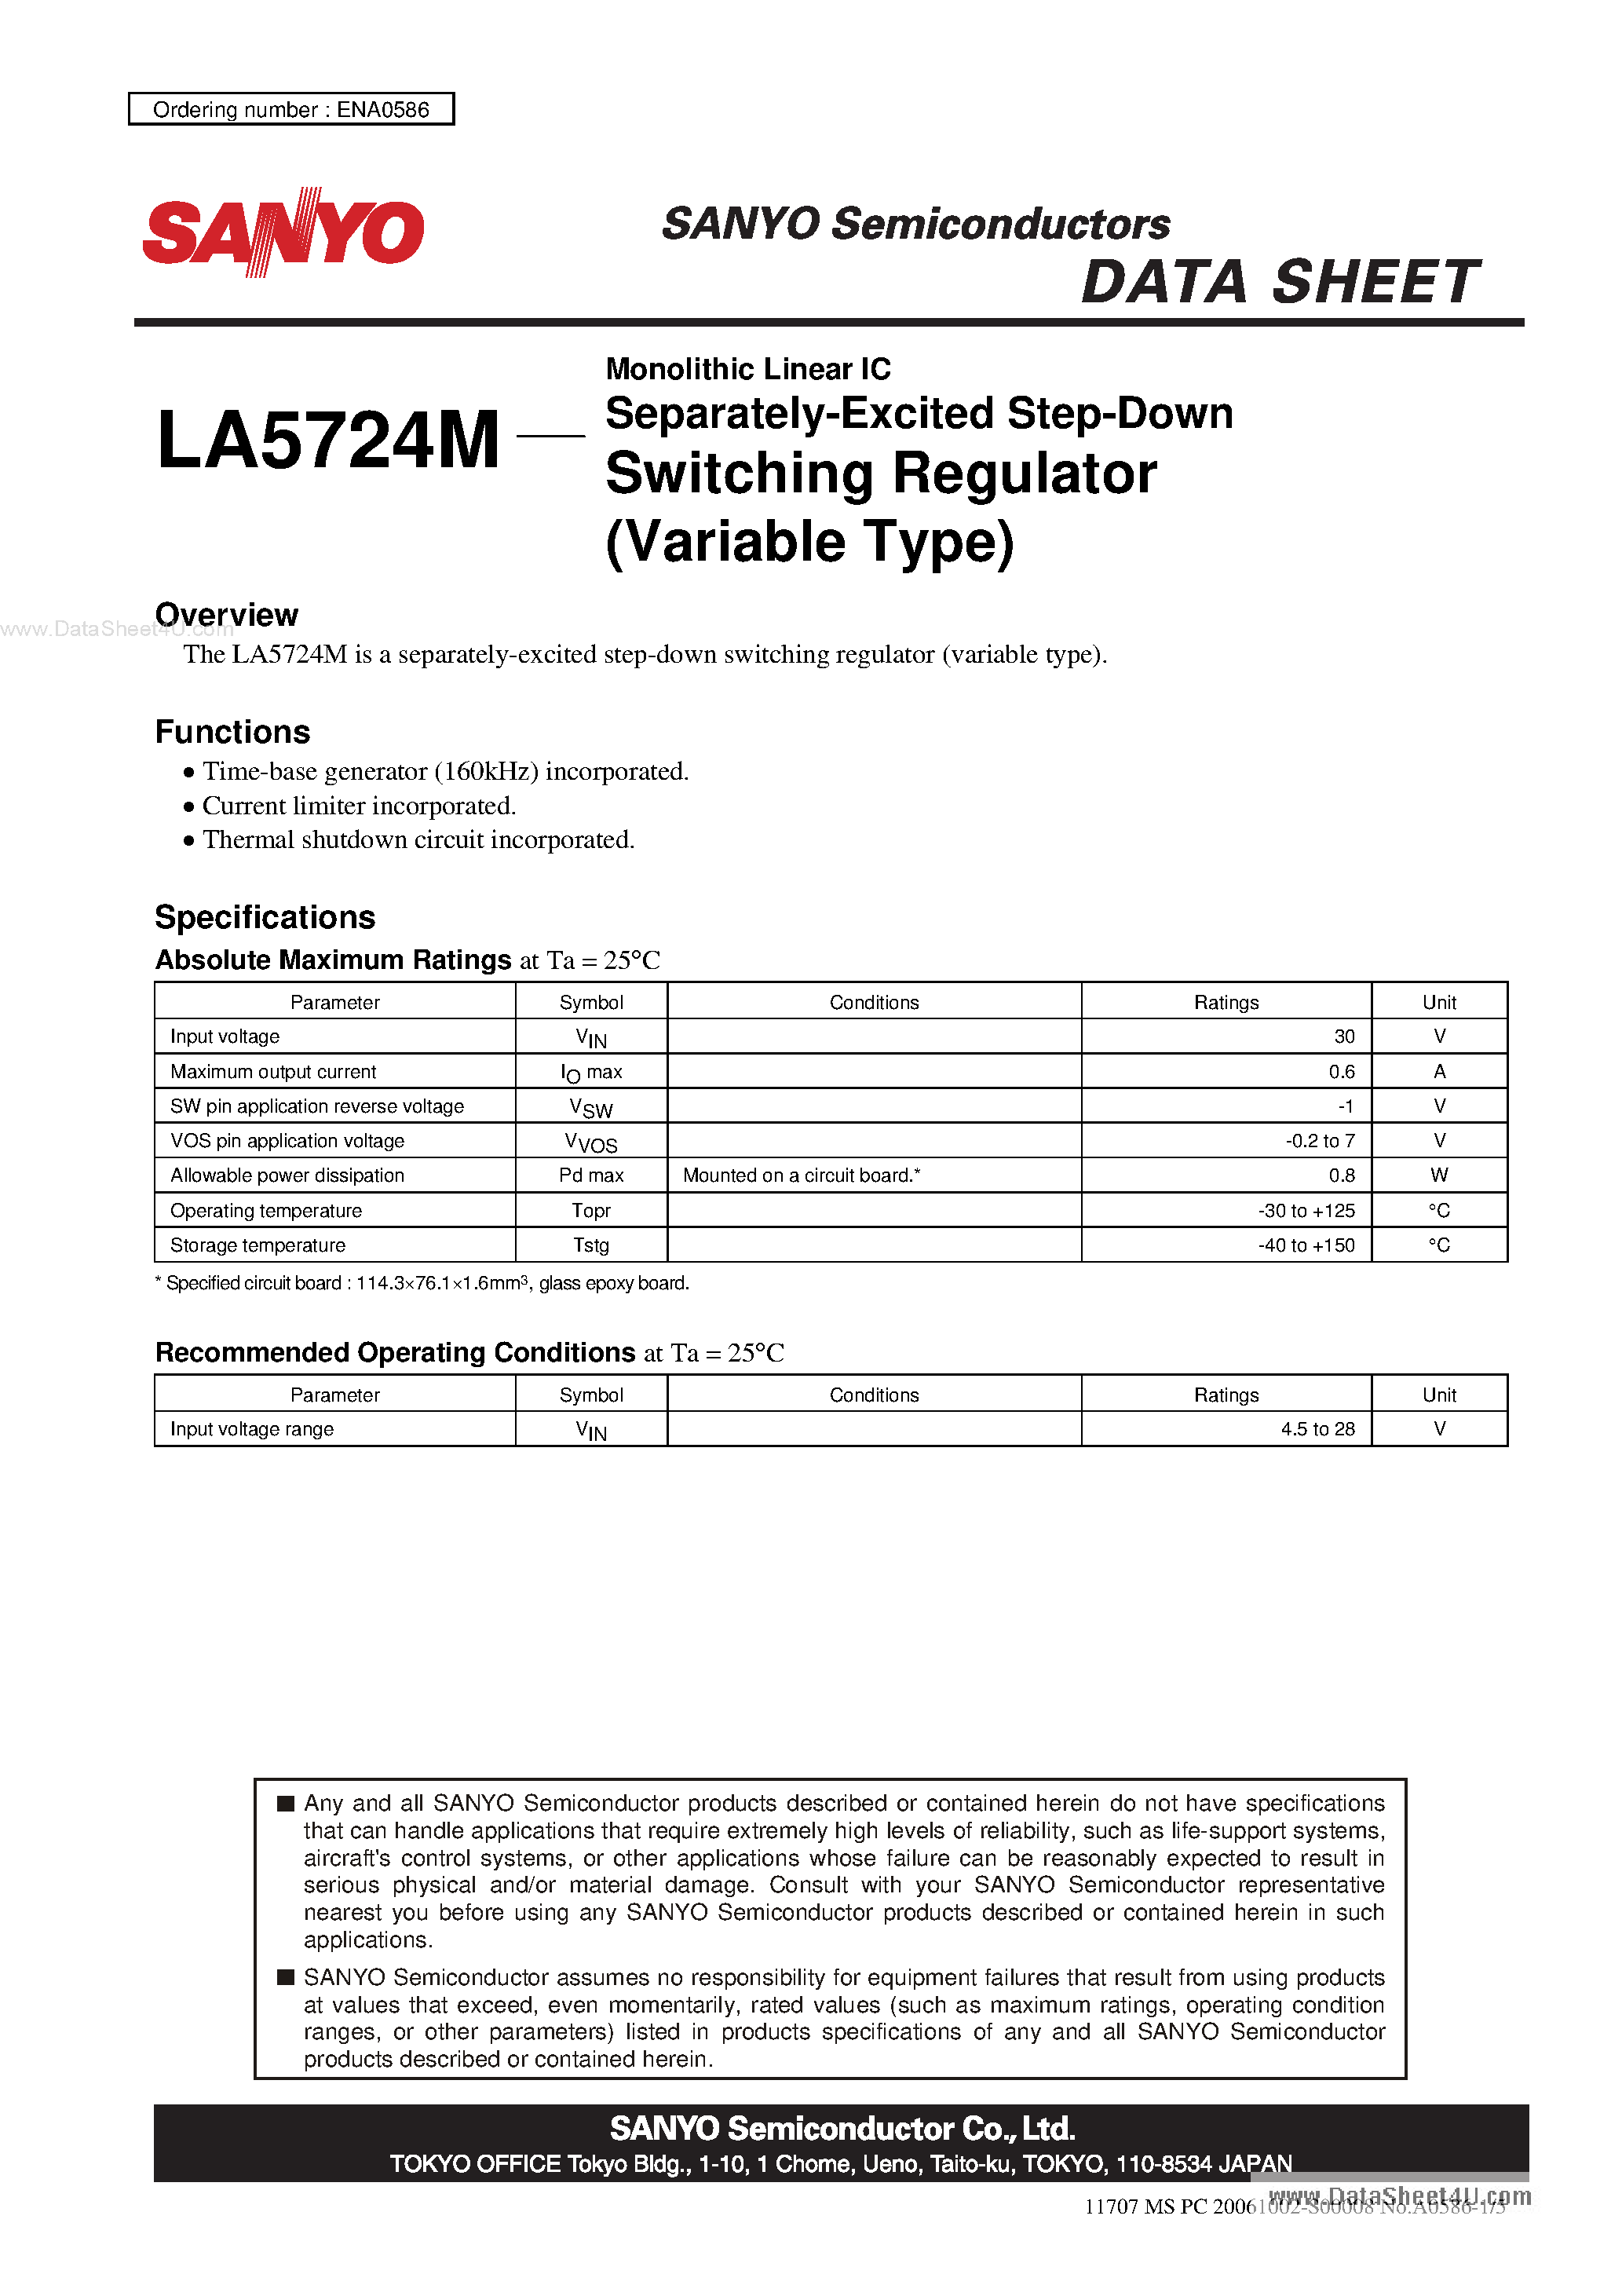 Даташит LA5724M-Monolithic Linear IC Separately-Excited Step-Down Switching Regulator страница 1